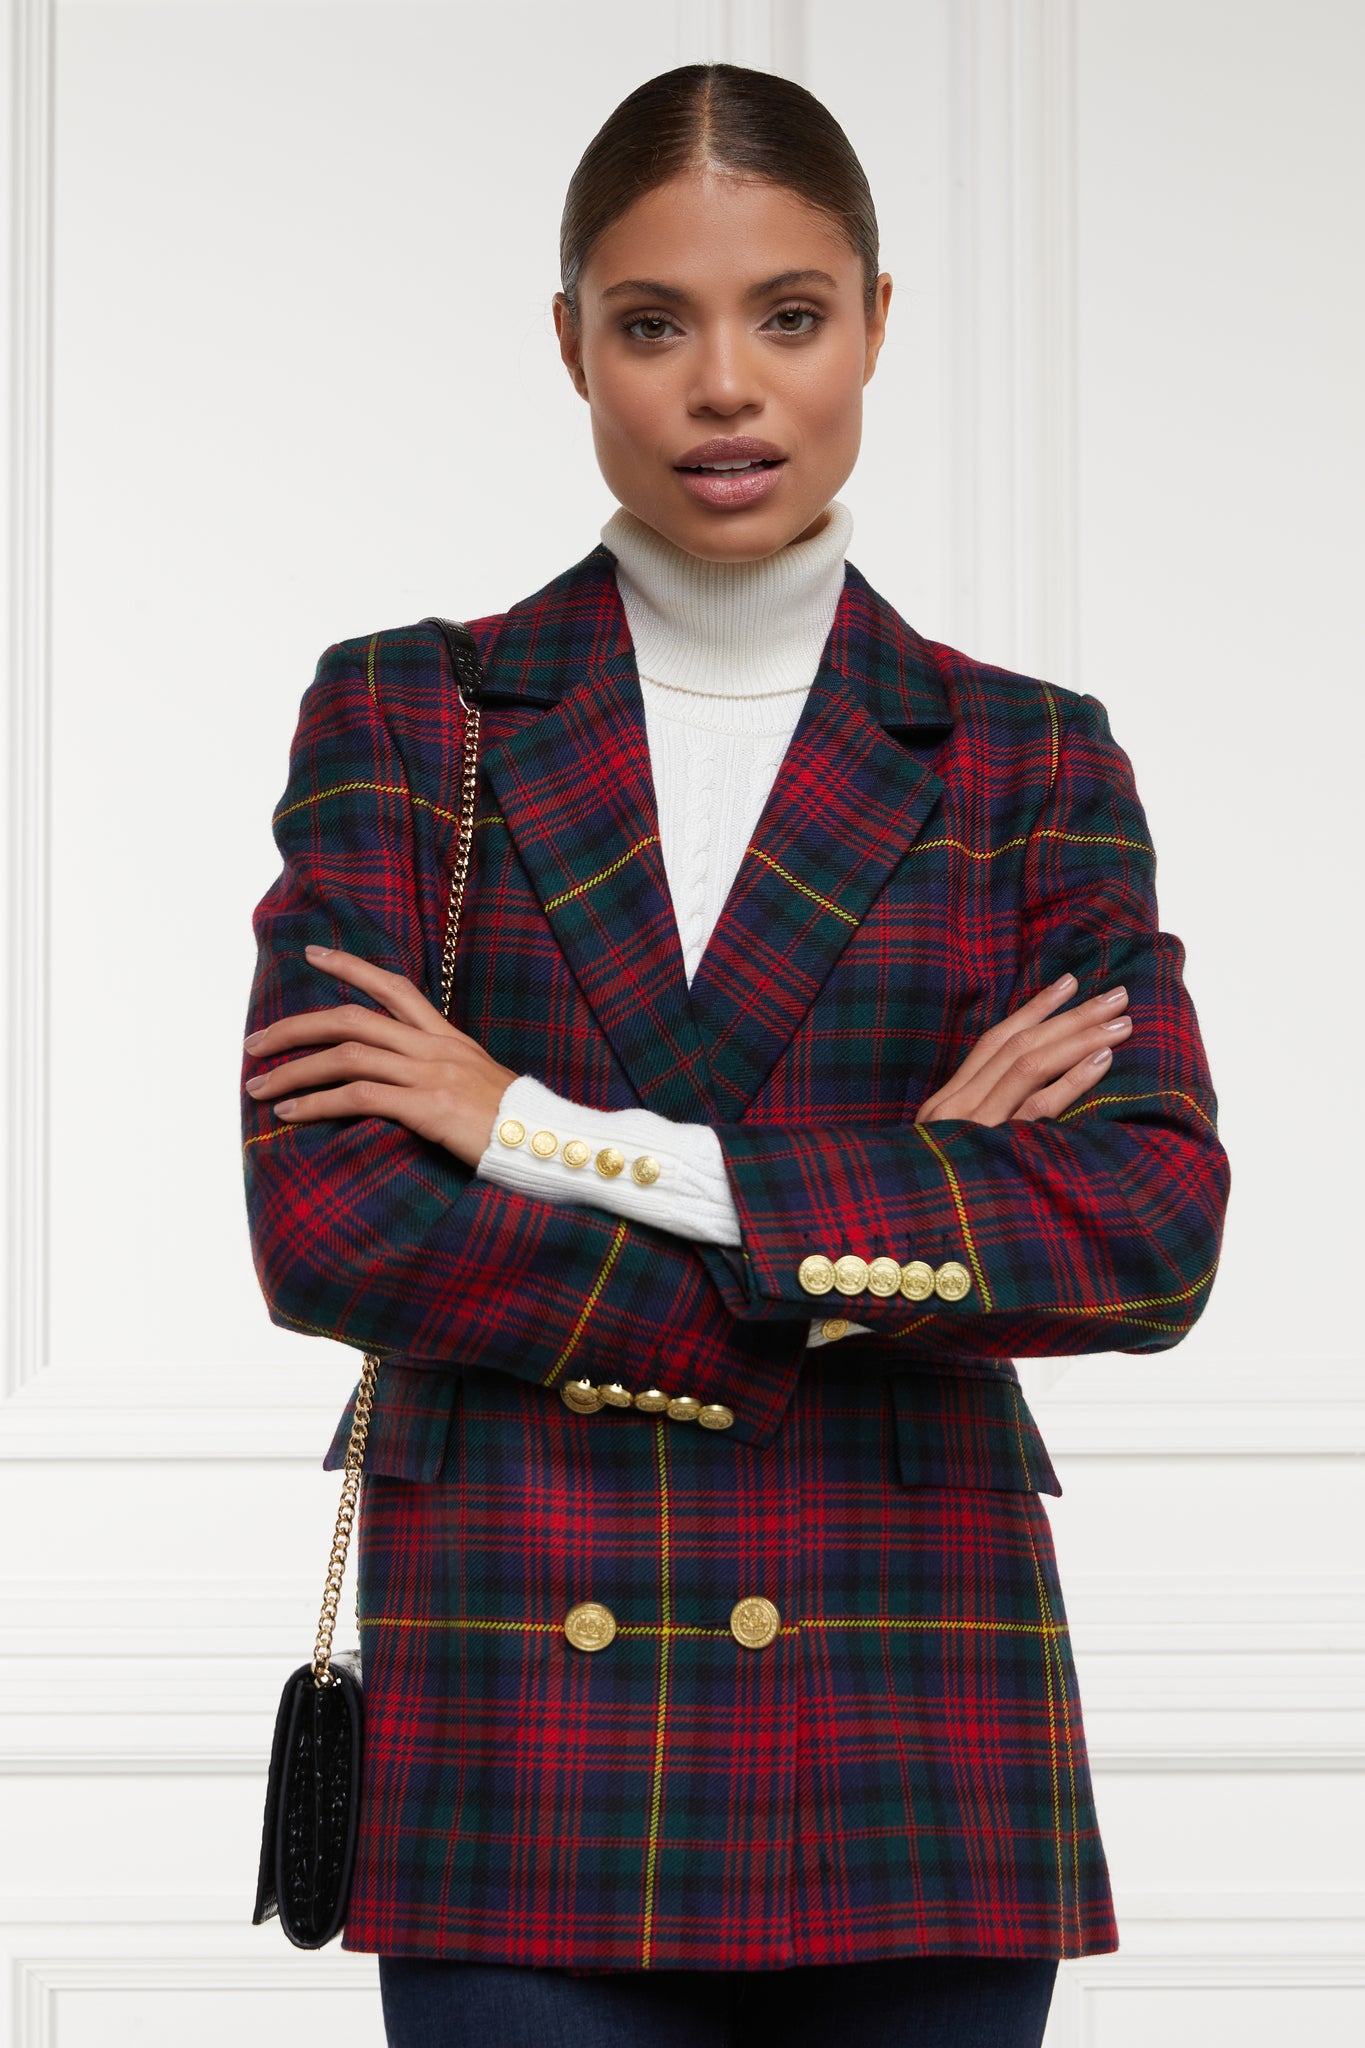 double breasted wool blazer in dark red navy green and yellow logan tartan with two hip pockets and gold button details down front and on cuffs and handmade in the uk